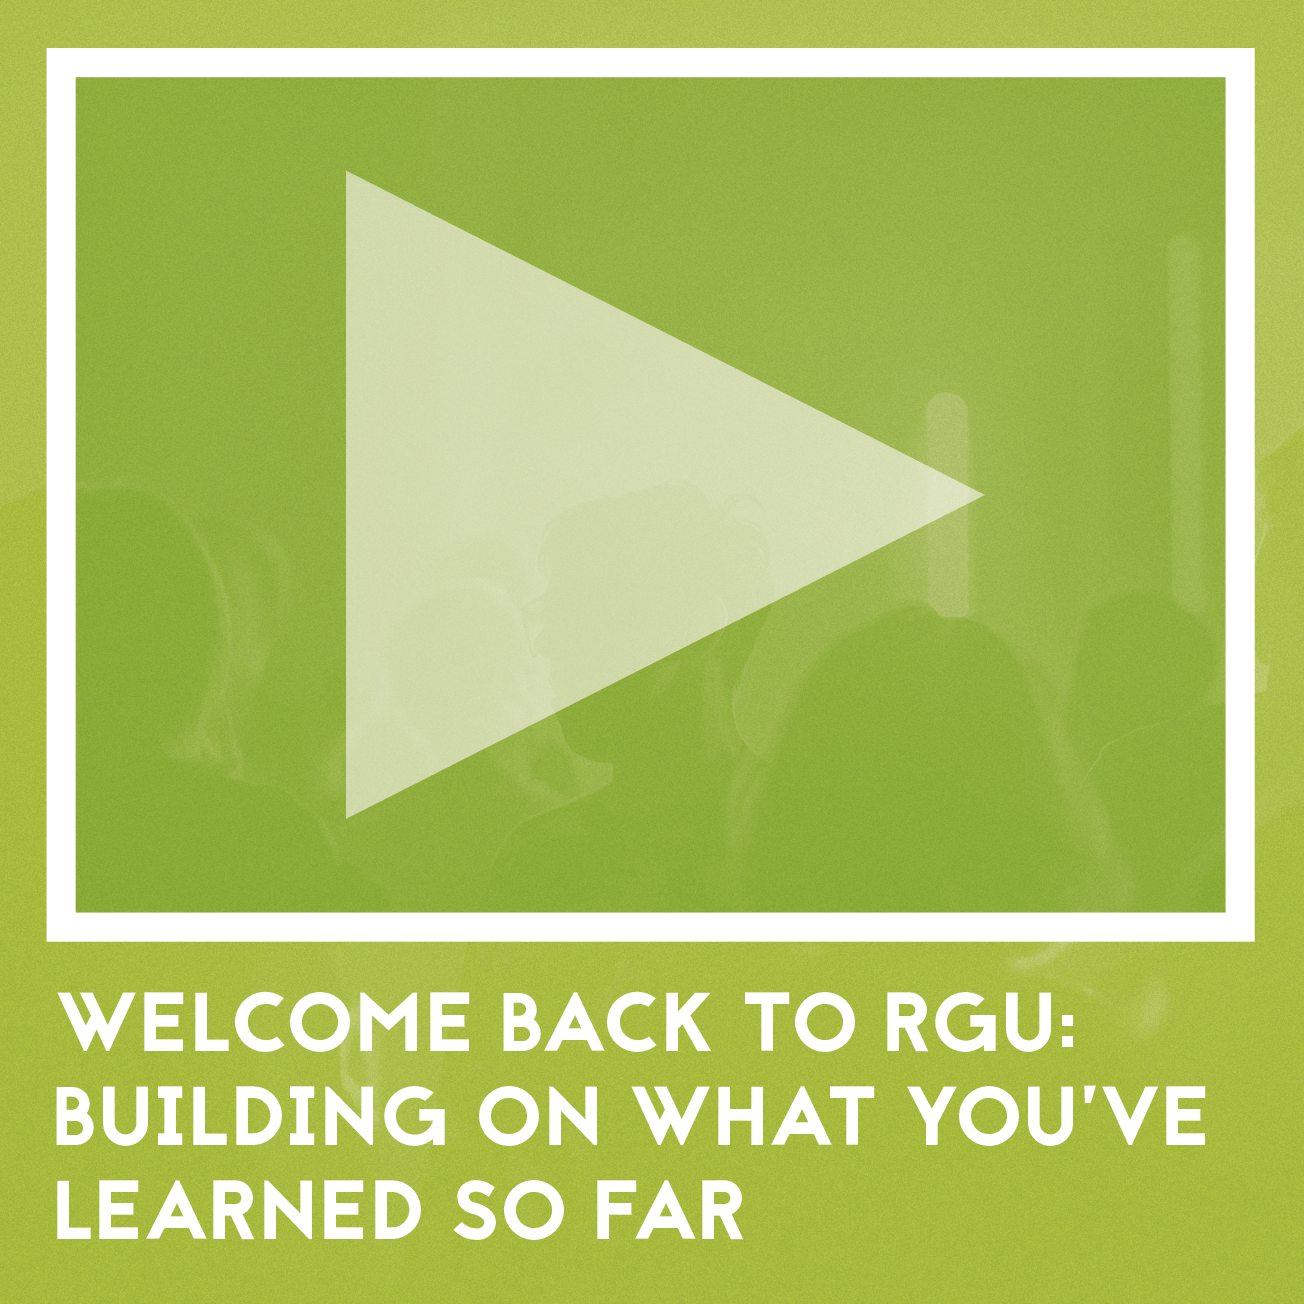  Welcome Back to RGU: Building on what you’ve learned so far.